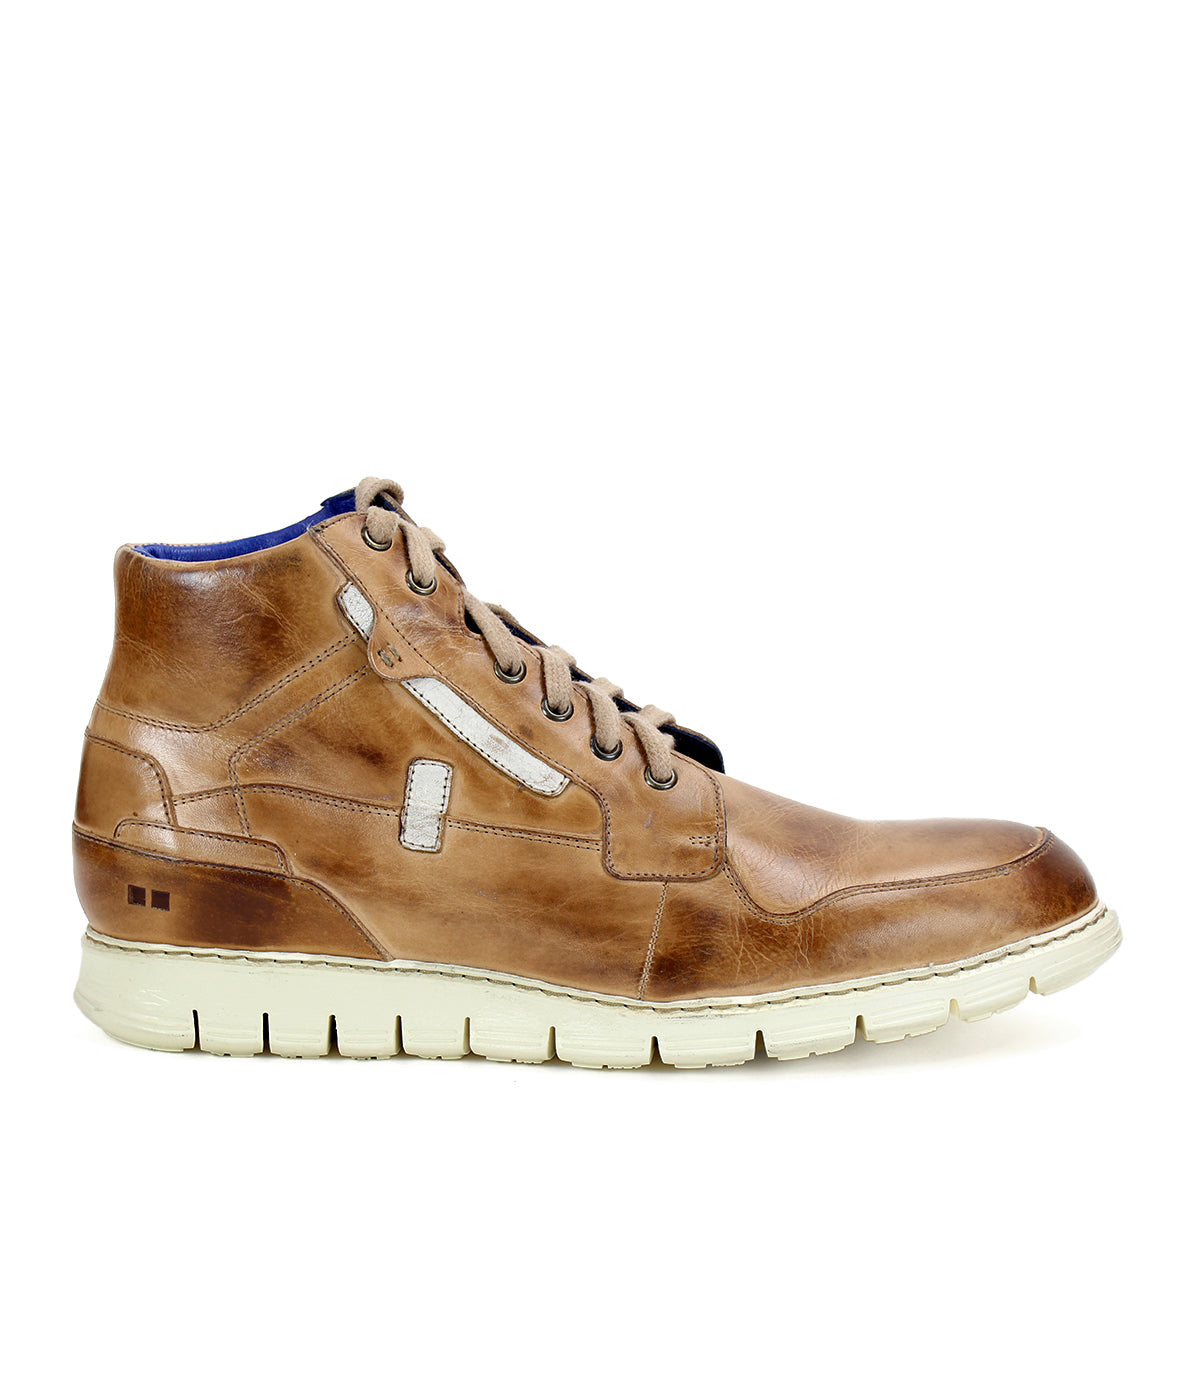 A men's tan leather sneaker with blue soles that features a comfortable insole for all-day wear. - Galahad sneaker by Bed Stu.